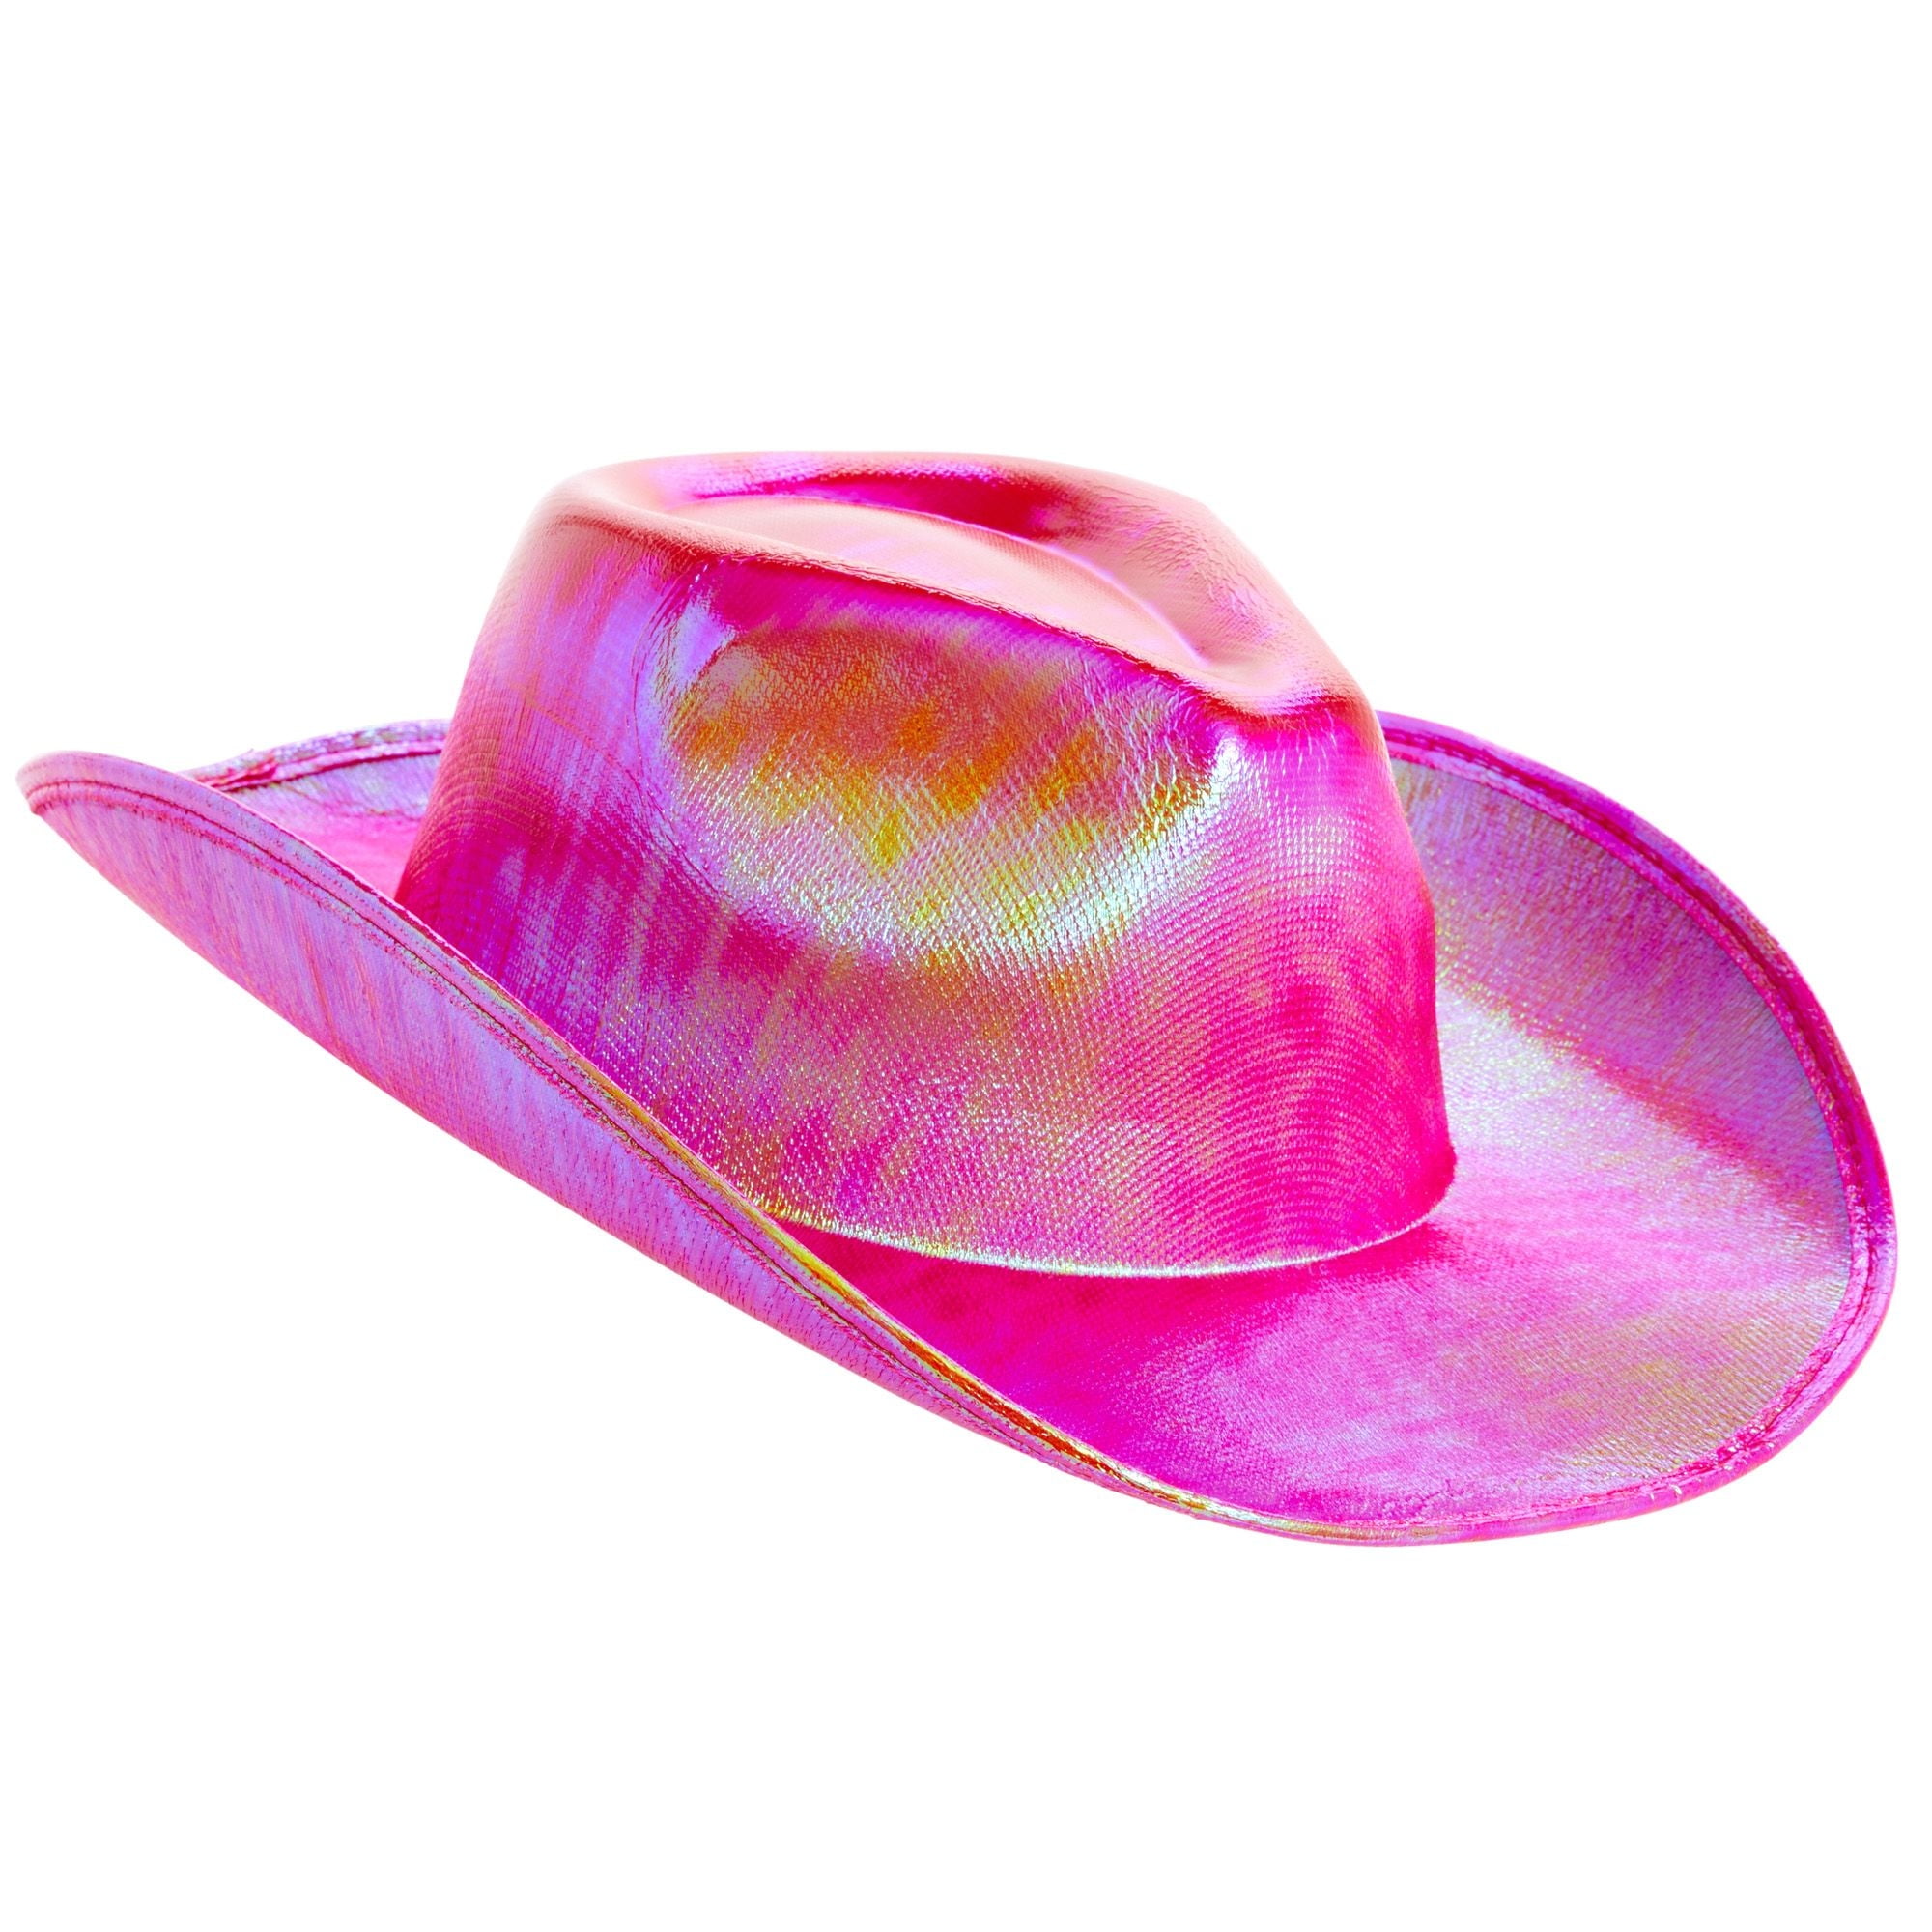 Pink Cowboy Hat - Sparkly Metallic Cowgirl Hat for Costume, Dress